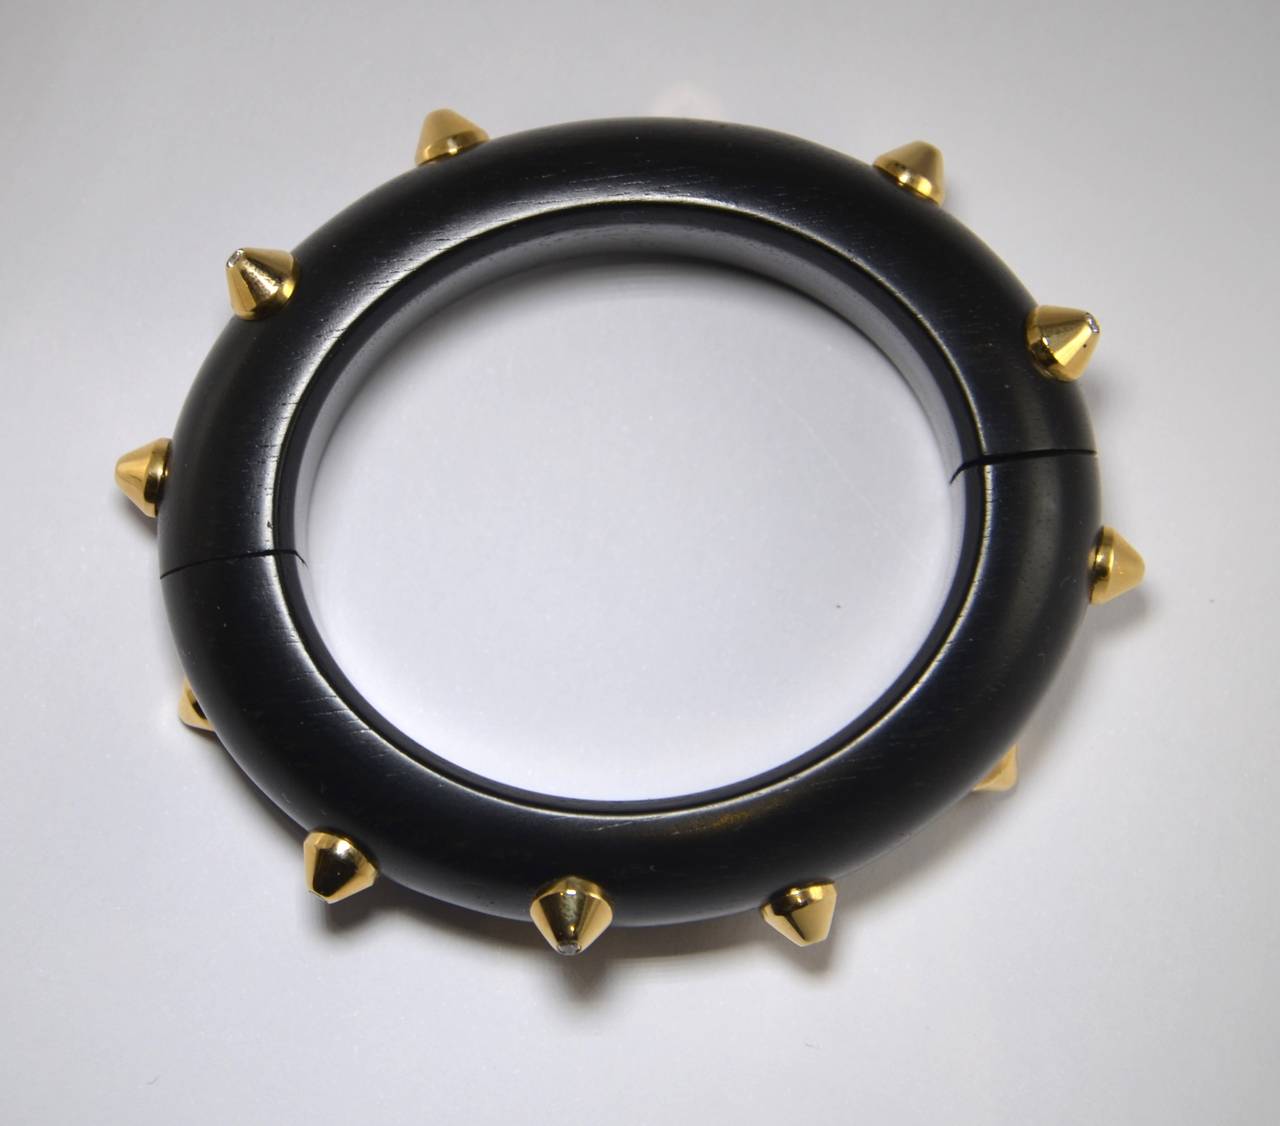 Ebony Wood Bangle with 12 Pyramids made of 18 KT Yellow Gold topped with a Diamond. The closing device is rotatably mounted in the sides. 

Brillant Cut Diamonds of approx. 0.41 ct., TW/vvs

Inside Dimension 54 x 47 mm, oval shape